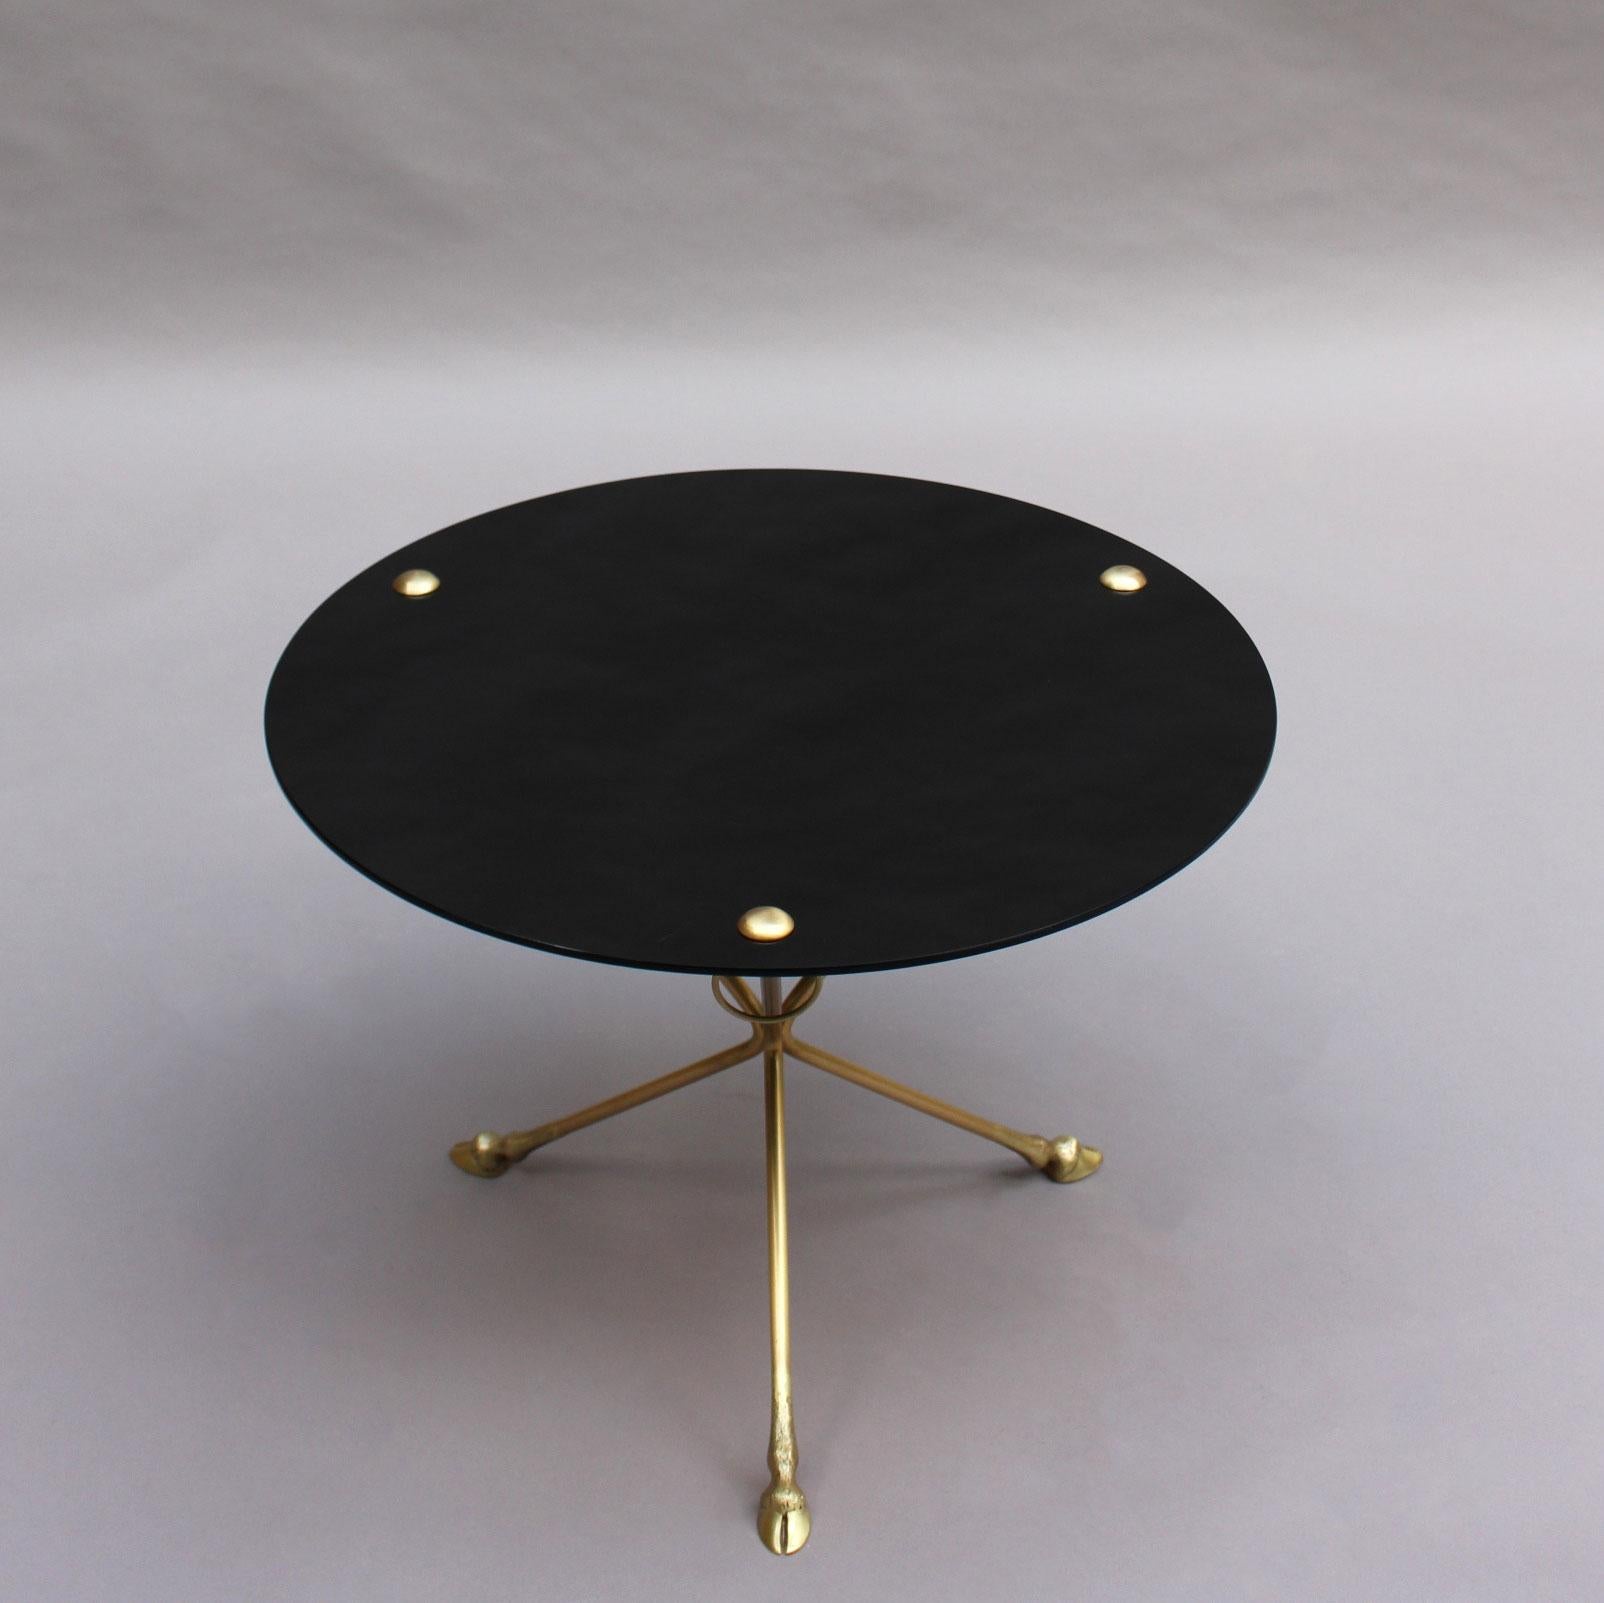 A fine French mid-century gueridon with a bronze tripod base finished with 